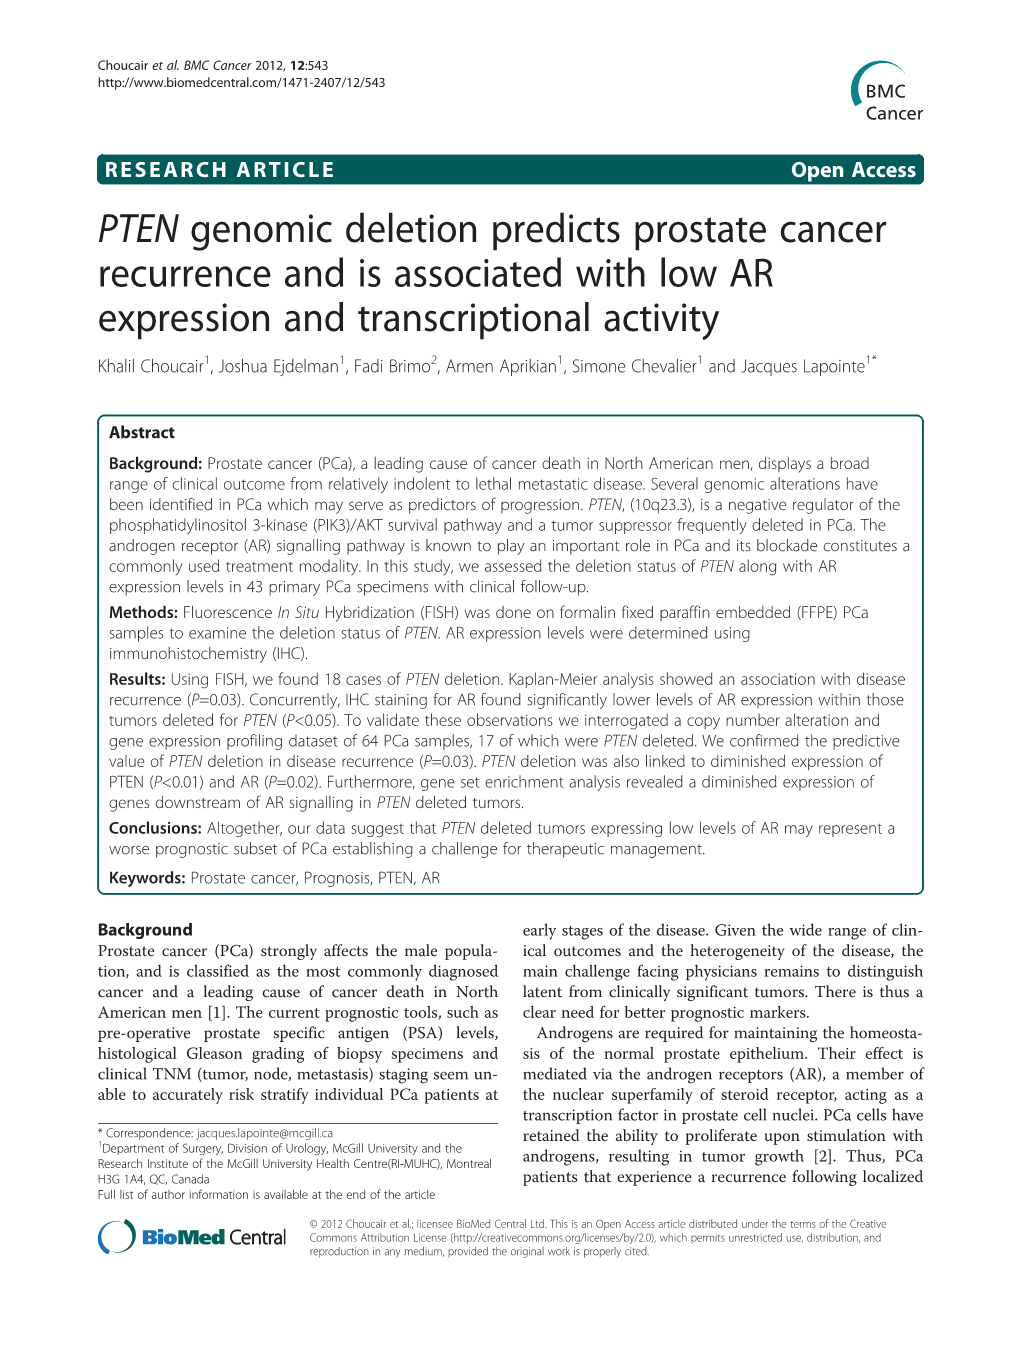 PTEN Genomic Deletion Predicts Prostate Cancer Recurrence and Is